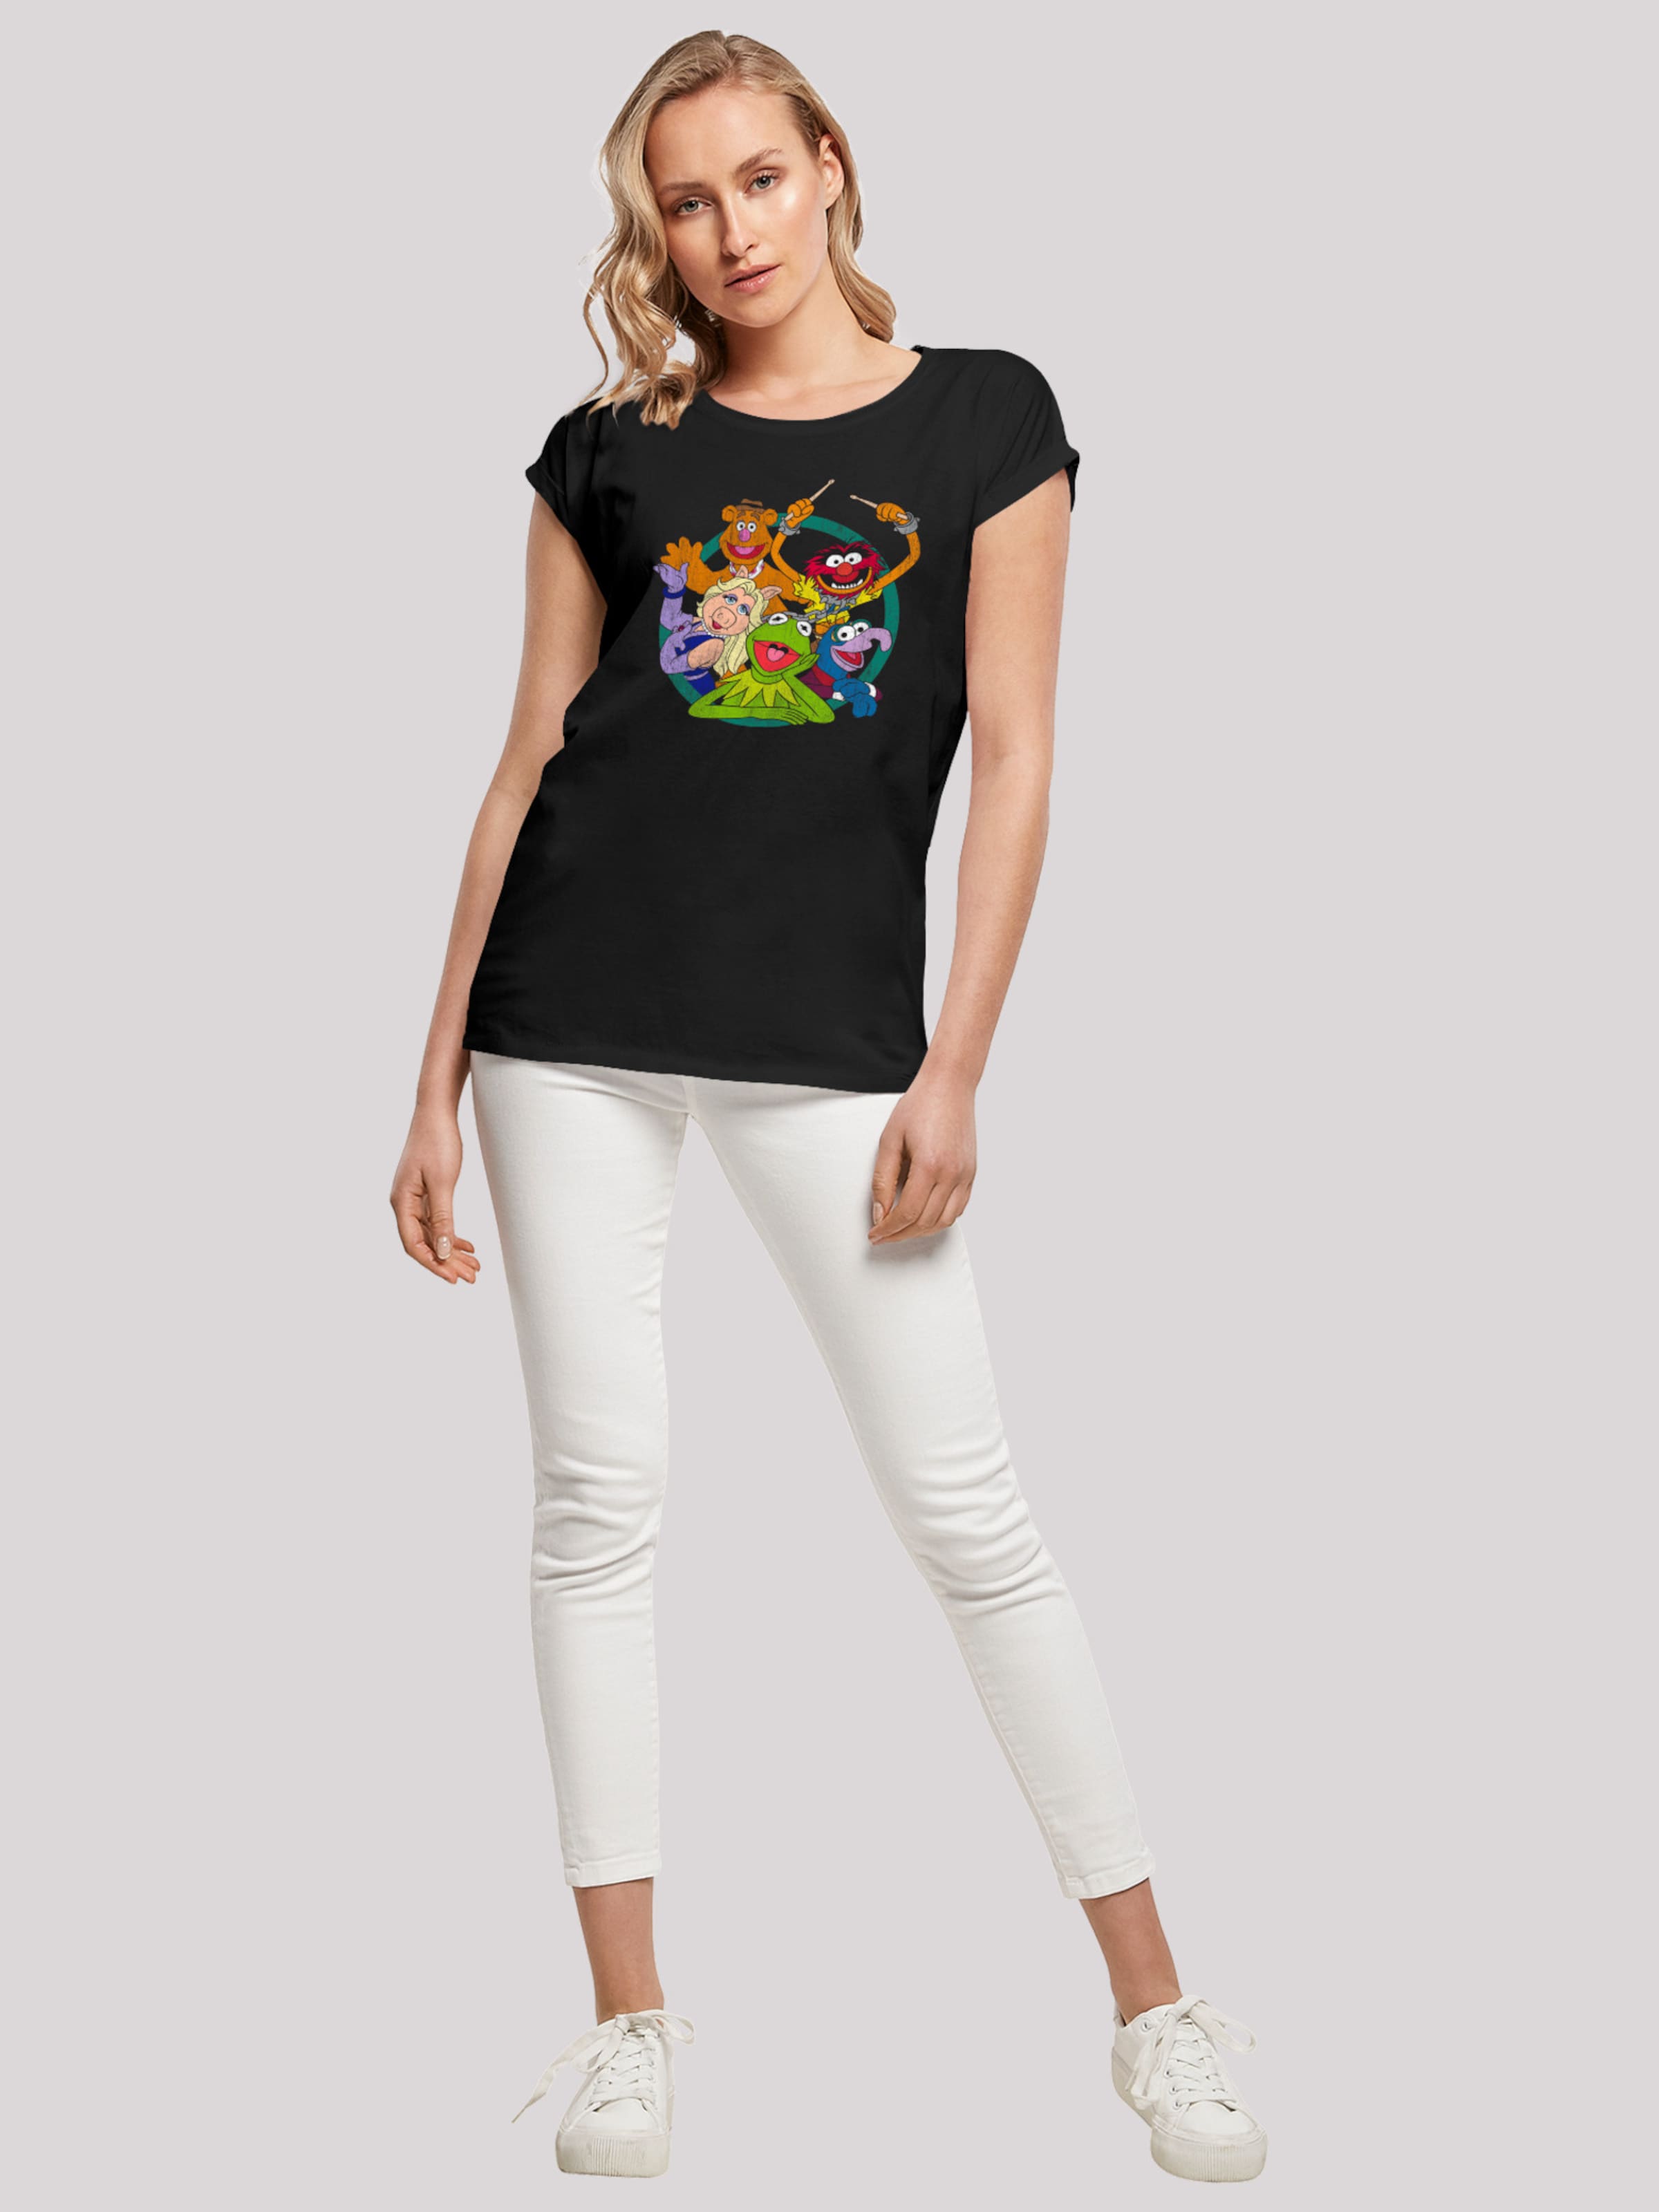 F4NT4STIC Shirt 'Disney Die Muppets Group Circle' in Black | ABOUT YOU